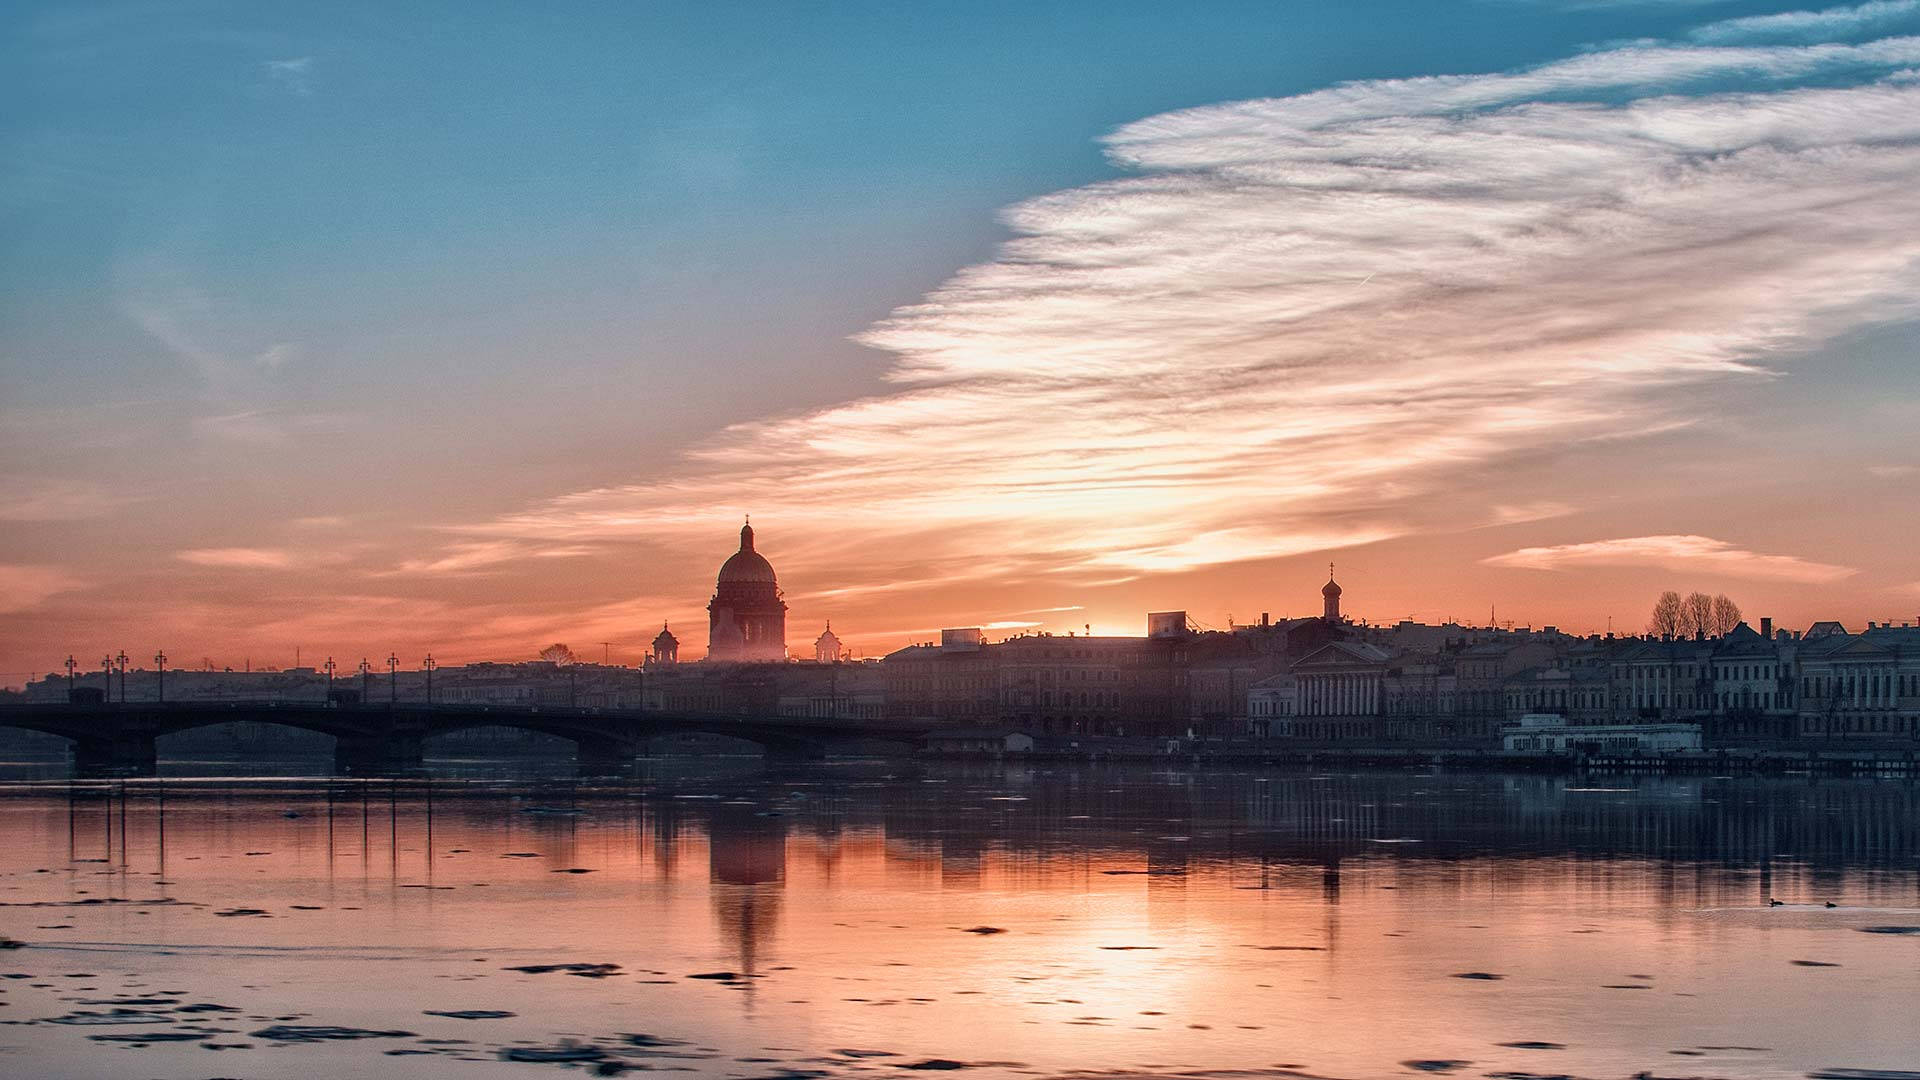 St. Petersburg Cathedral With Sunset View